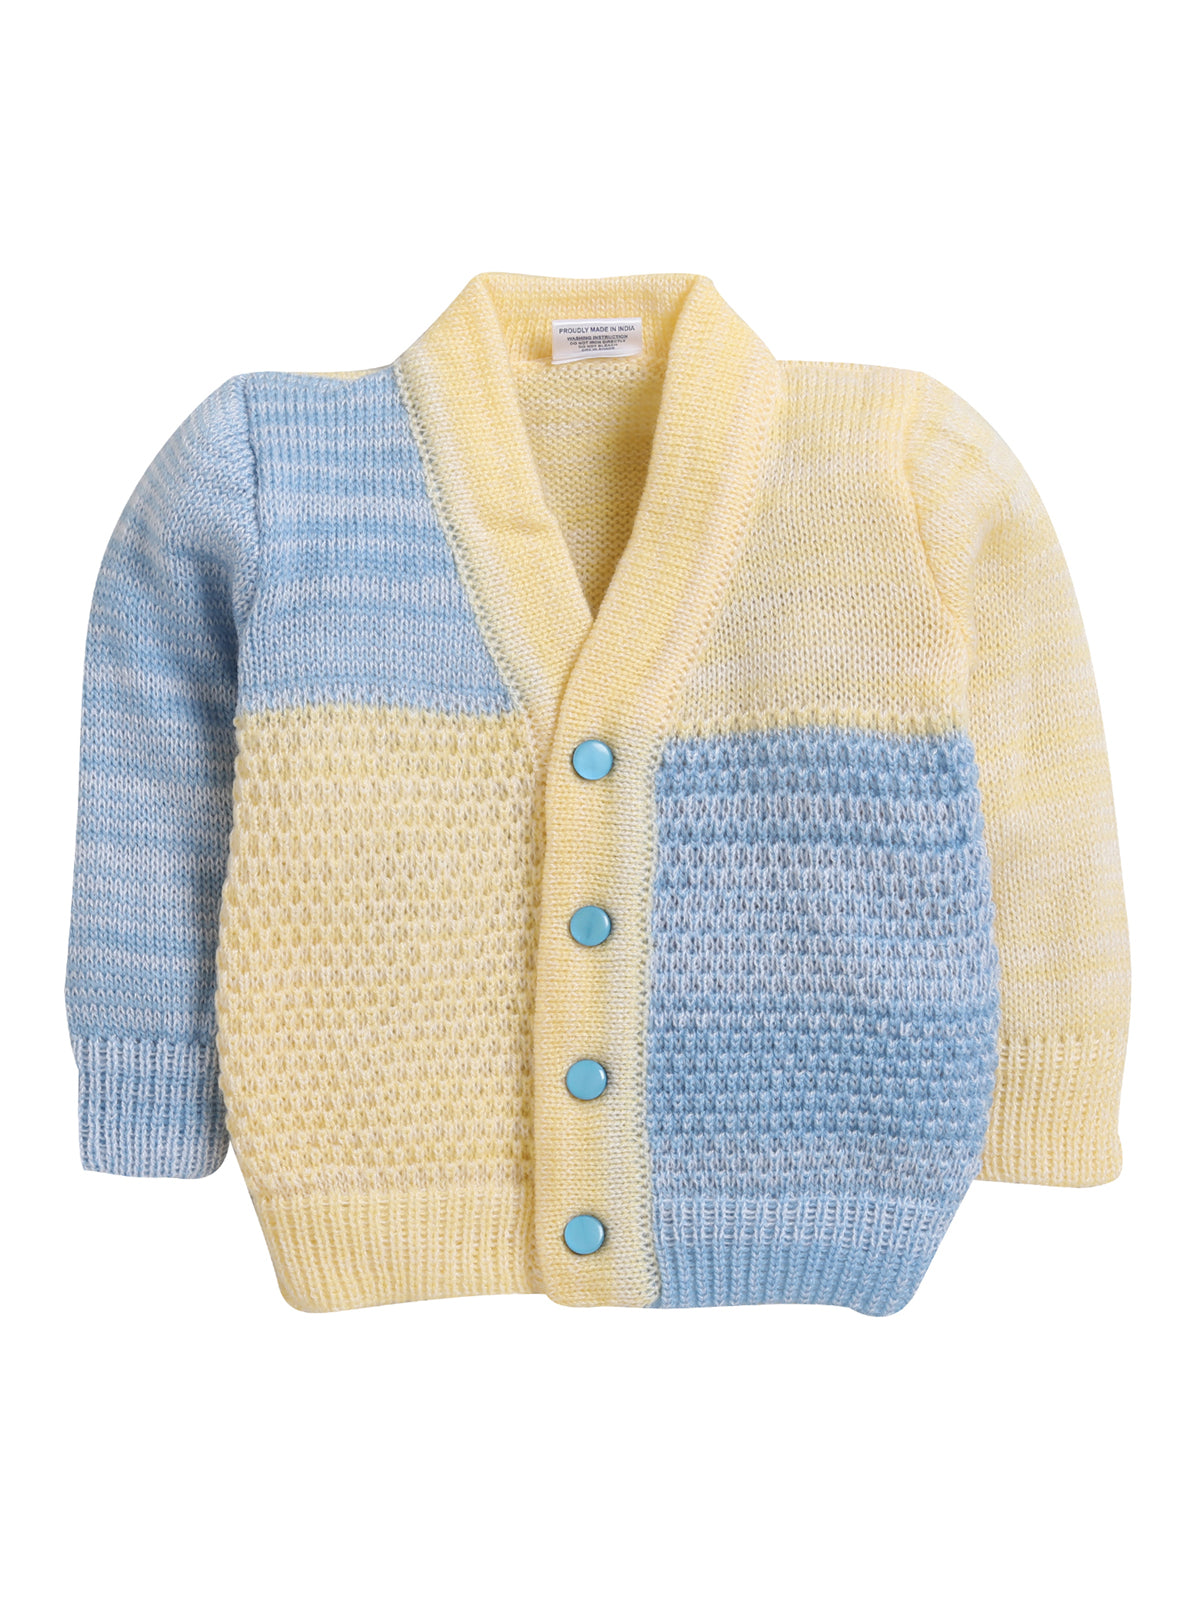 Warm And Cozy Sweater Set for Baby Boys/Girls